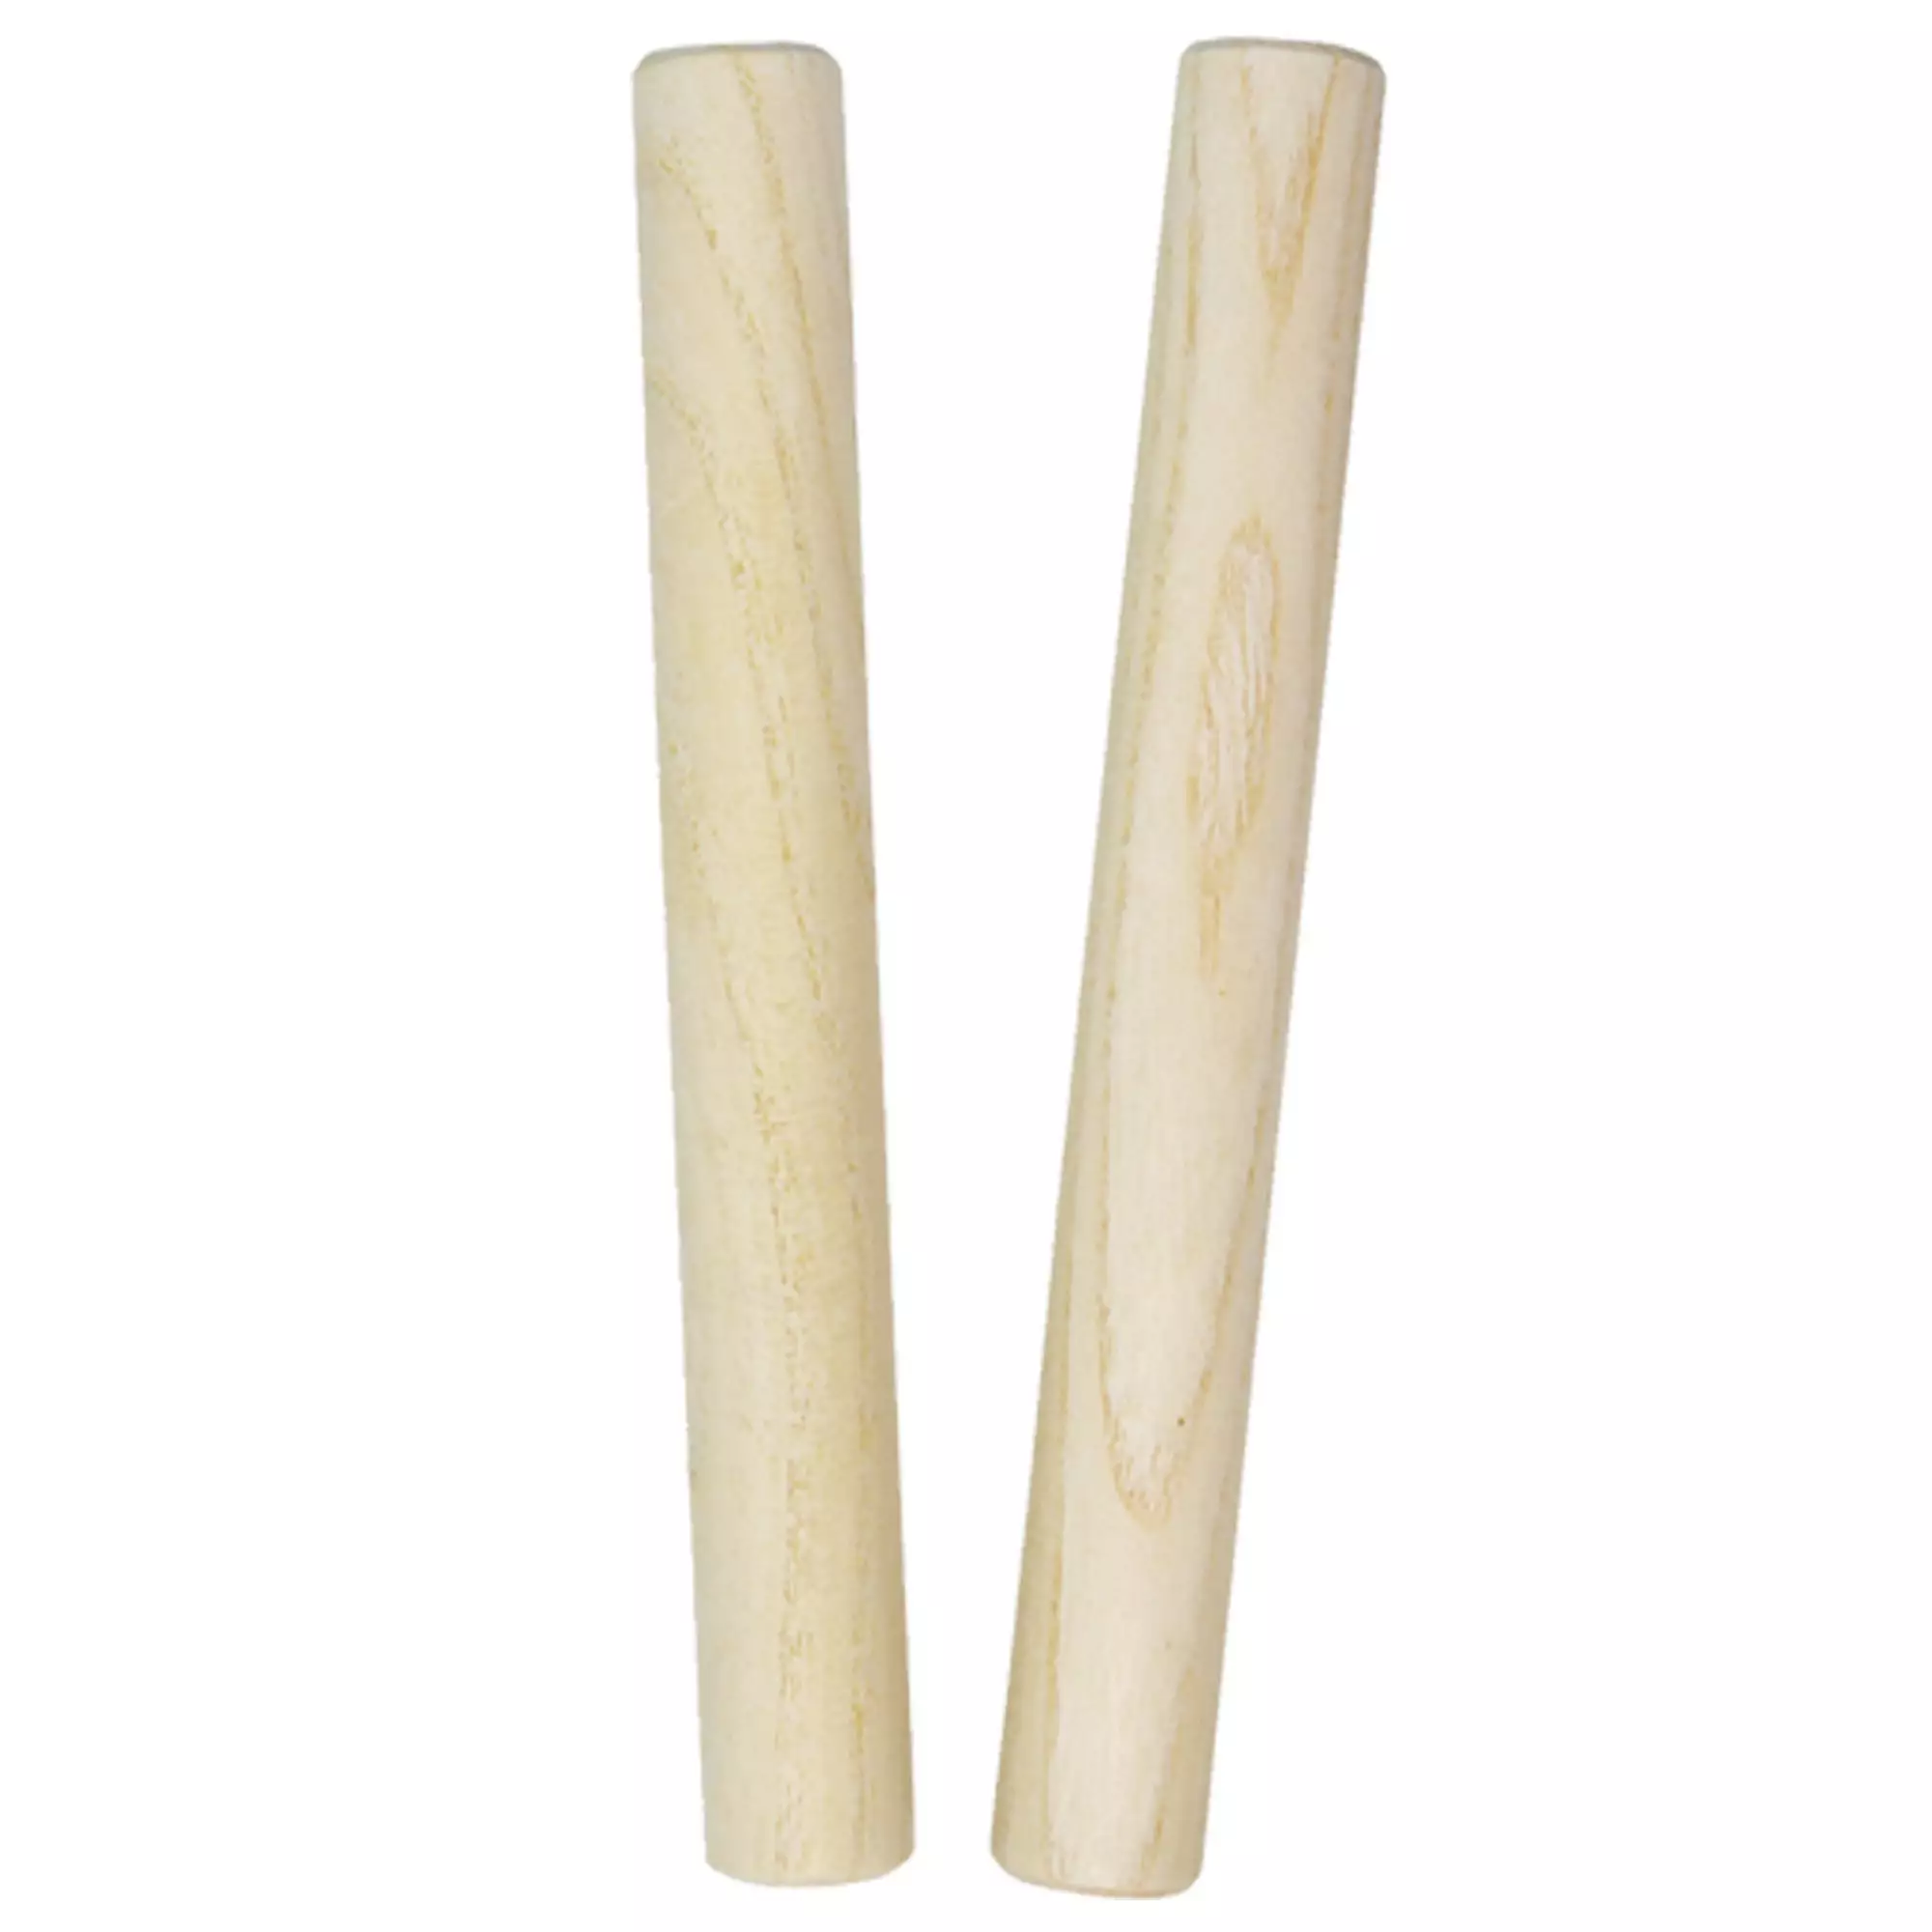 Pair of Claves